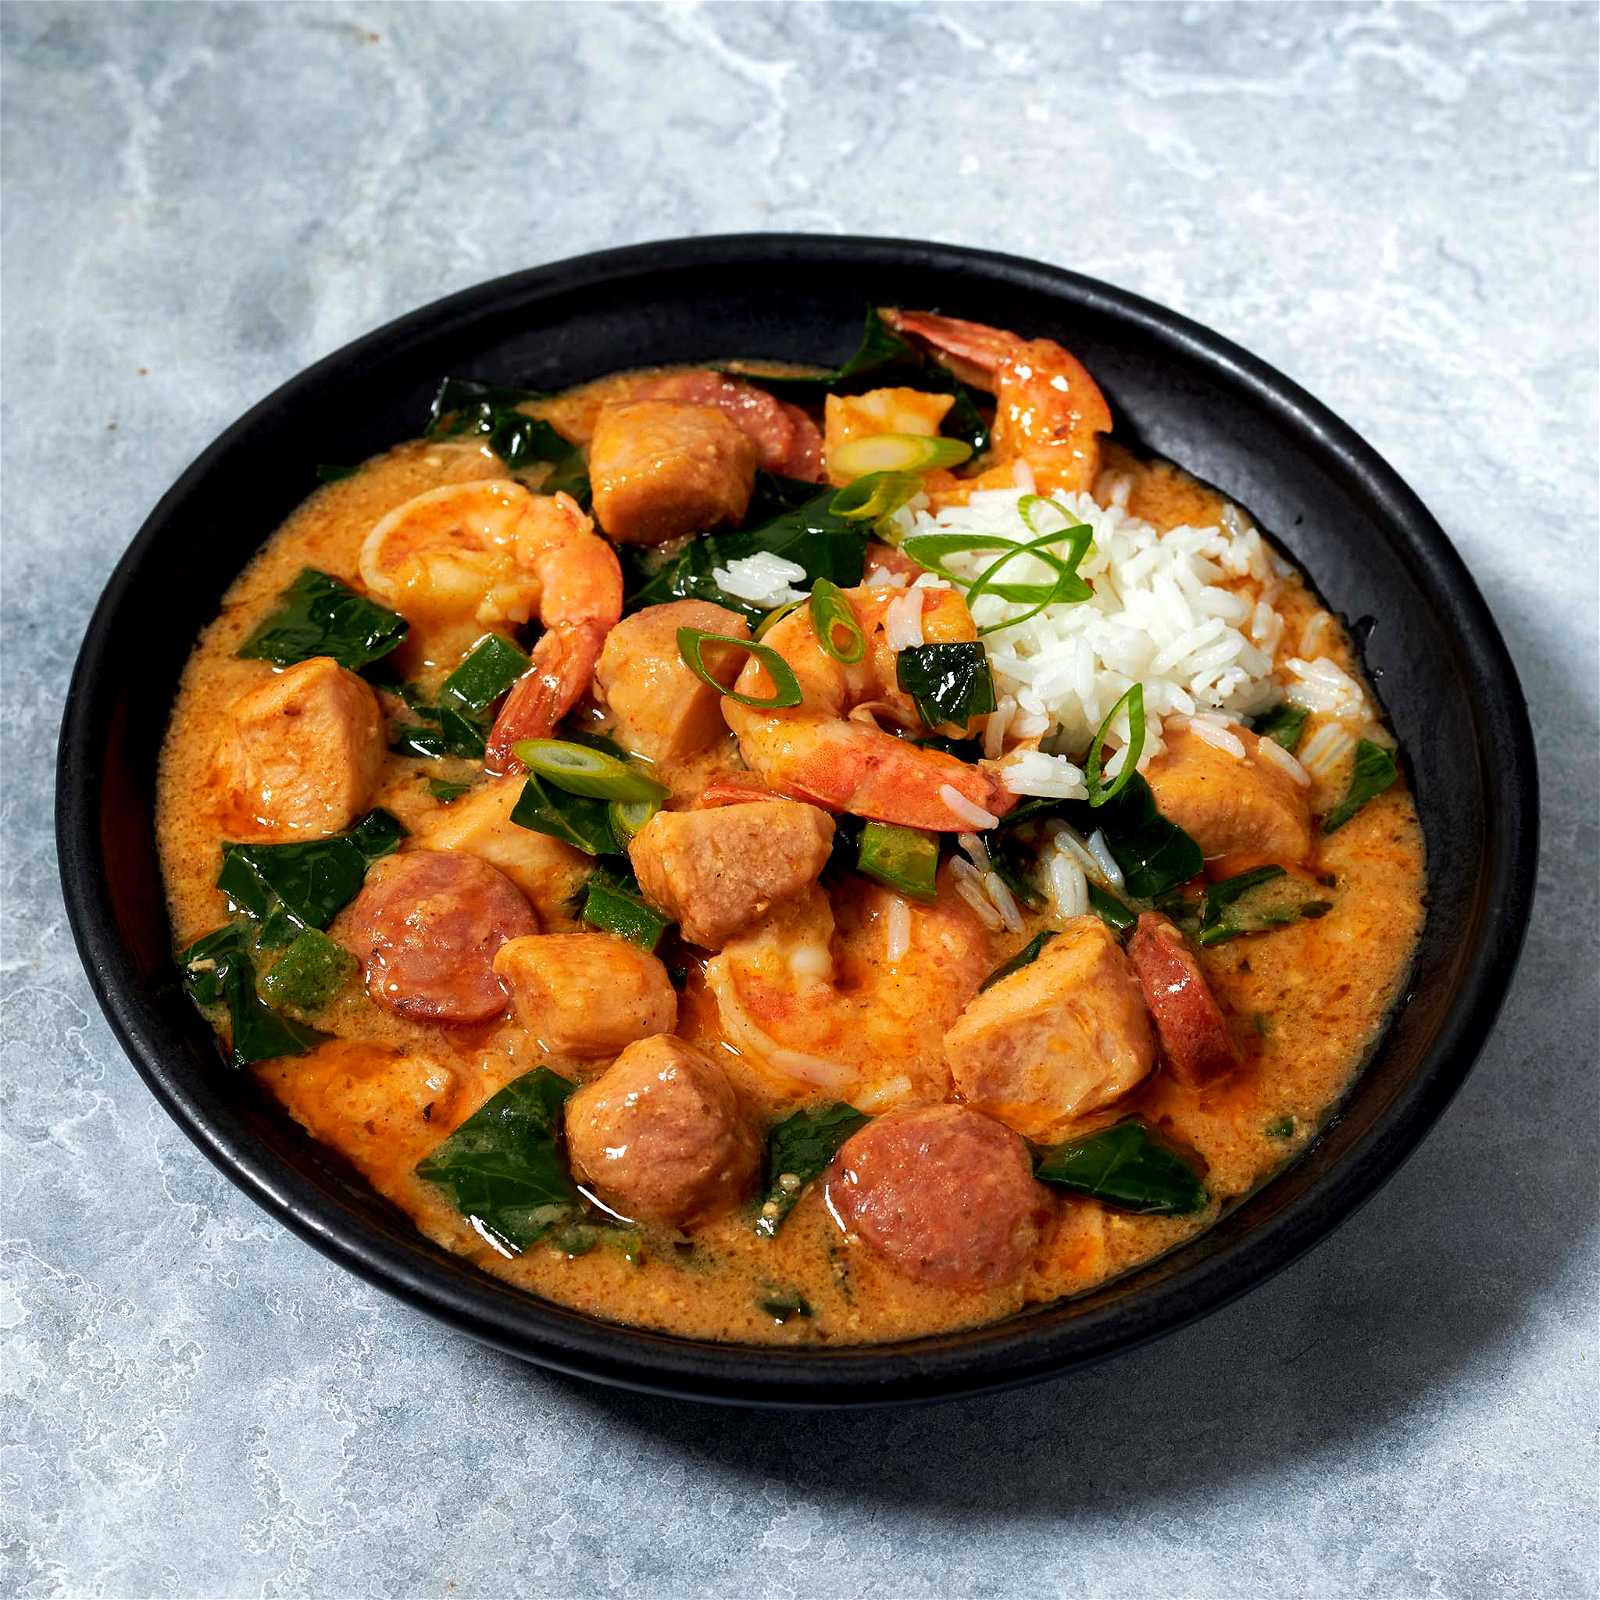 Image of Gumbo-Style Gator and Greens